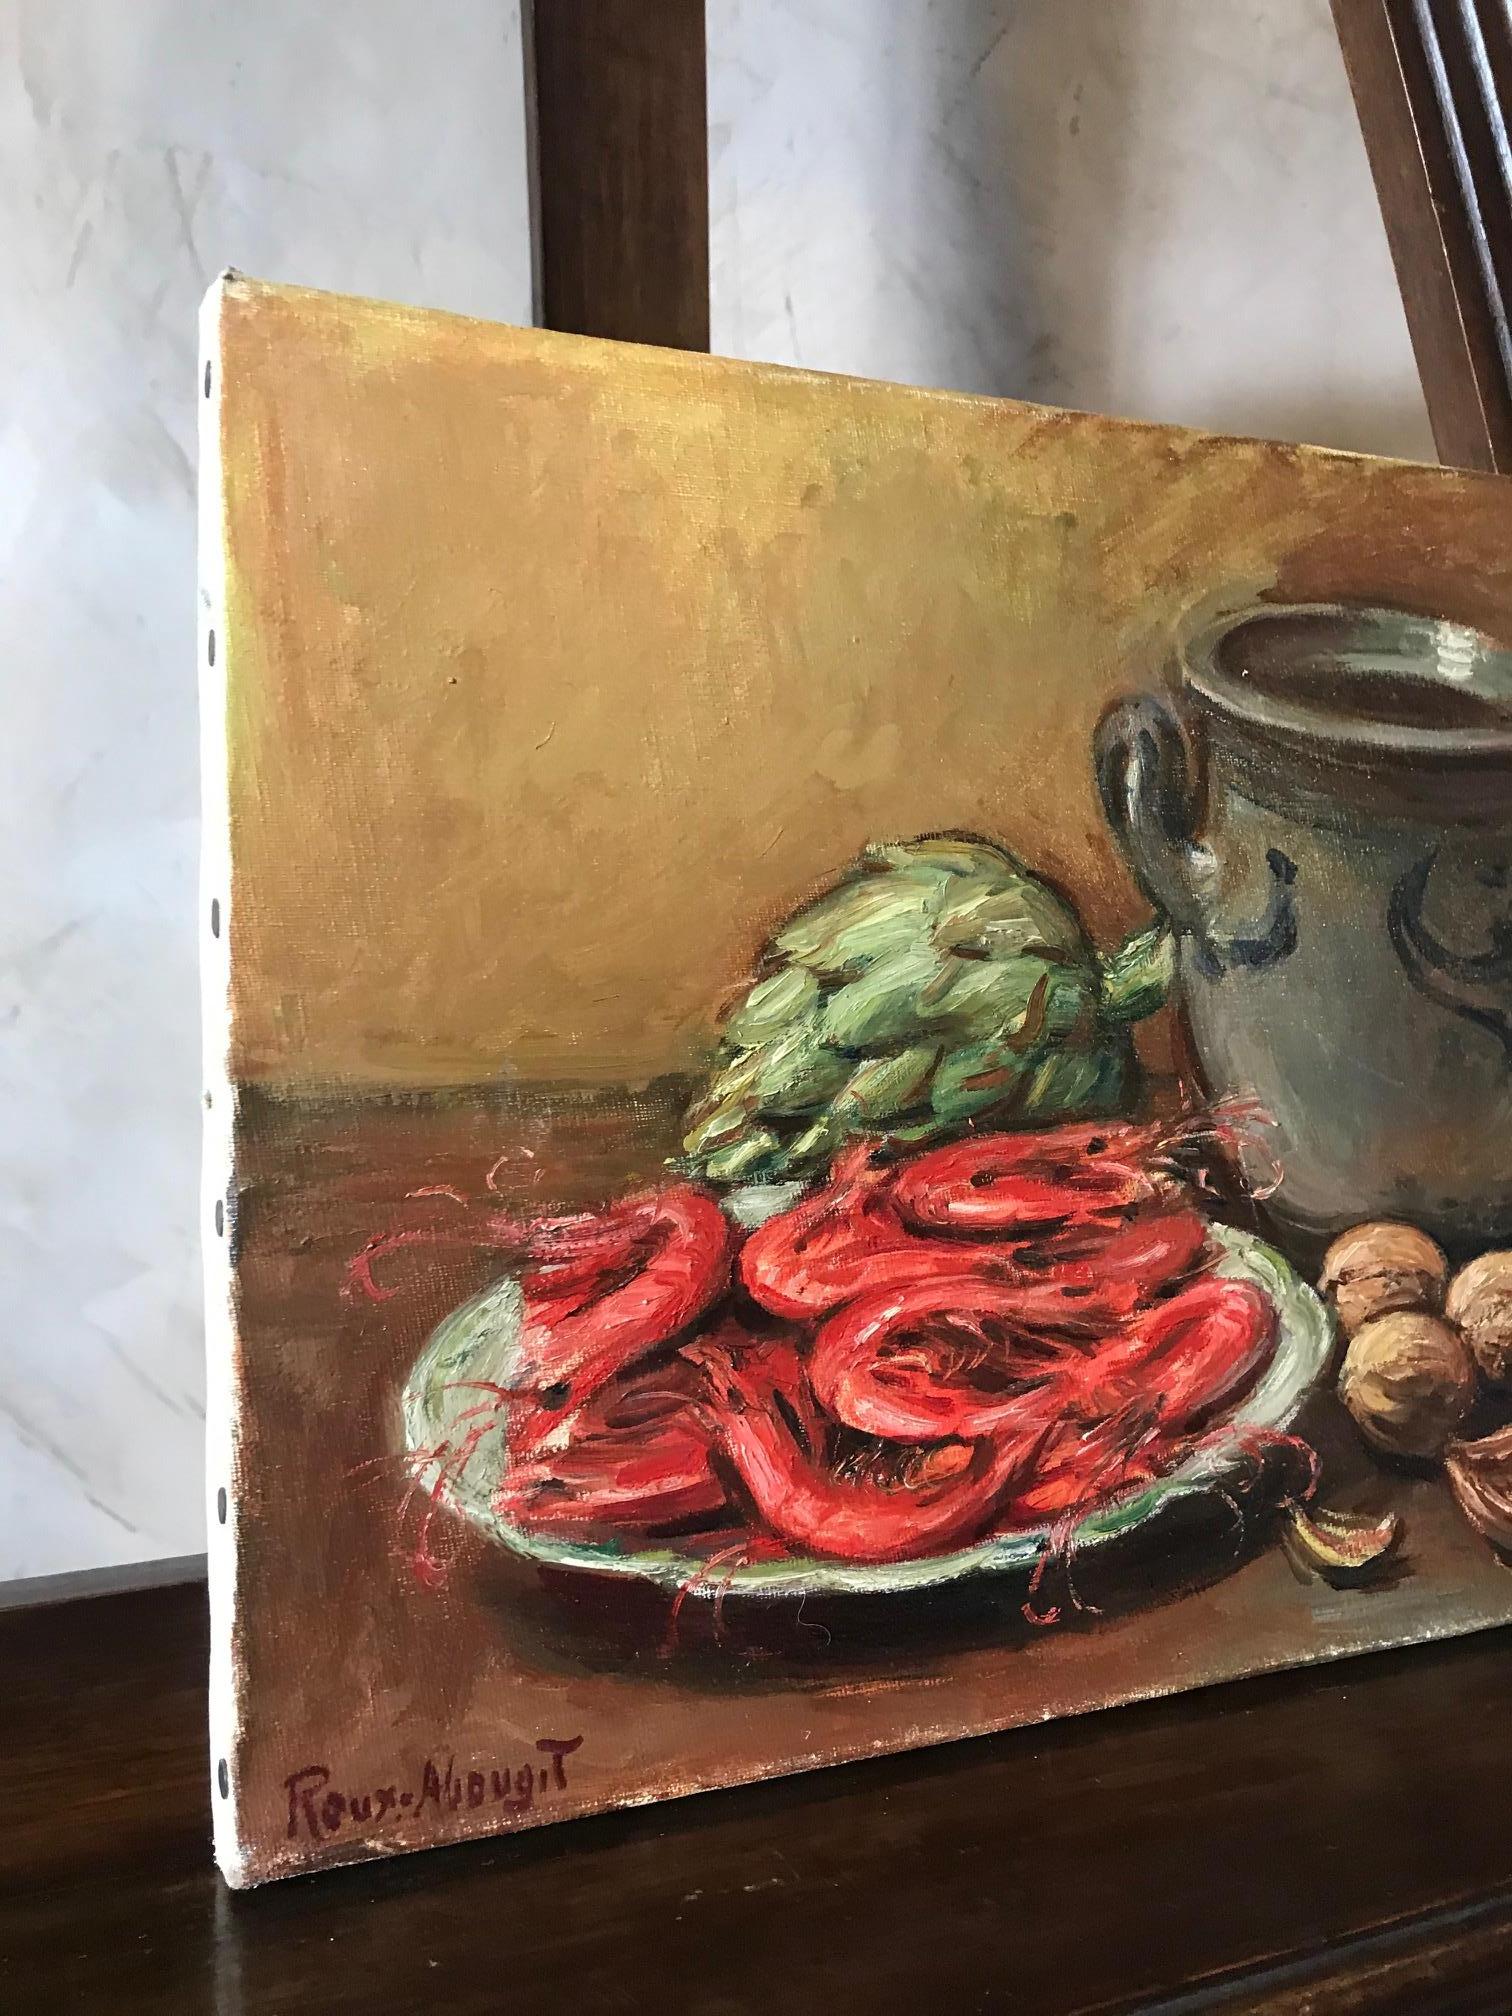 Oiled 20th Century French Still-Life Oil on Canvas Signed Roux-Abougit, 1930s For Sale